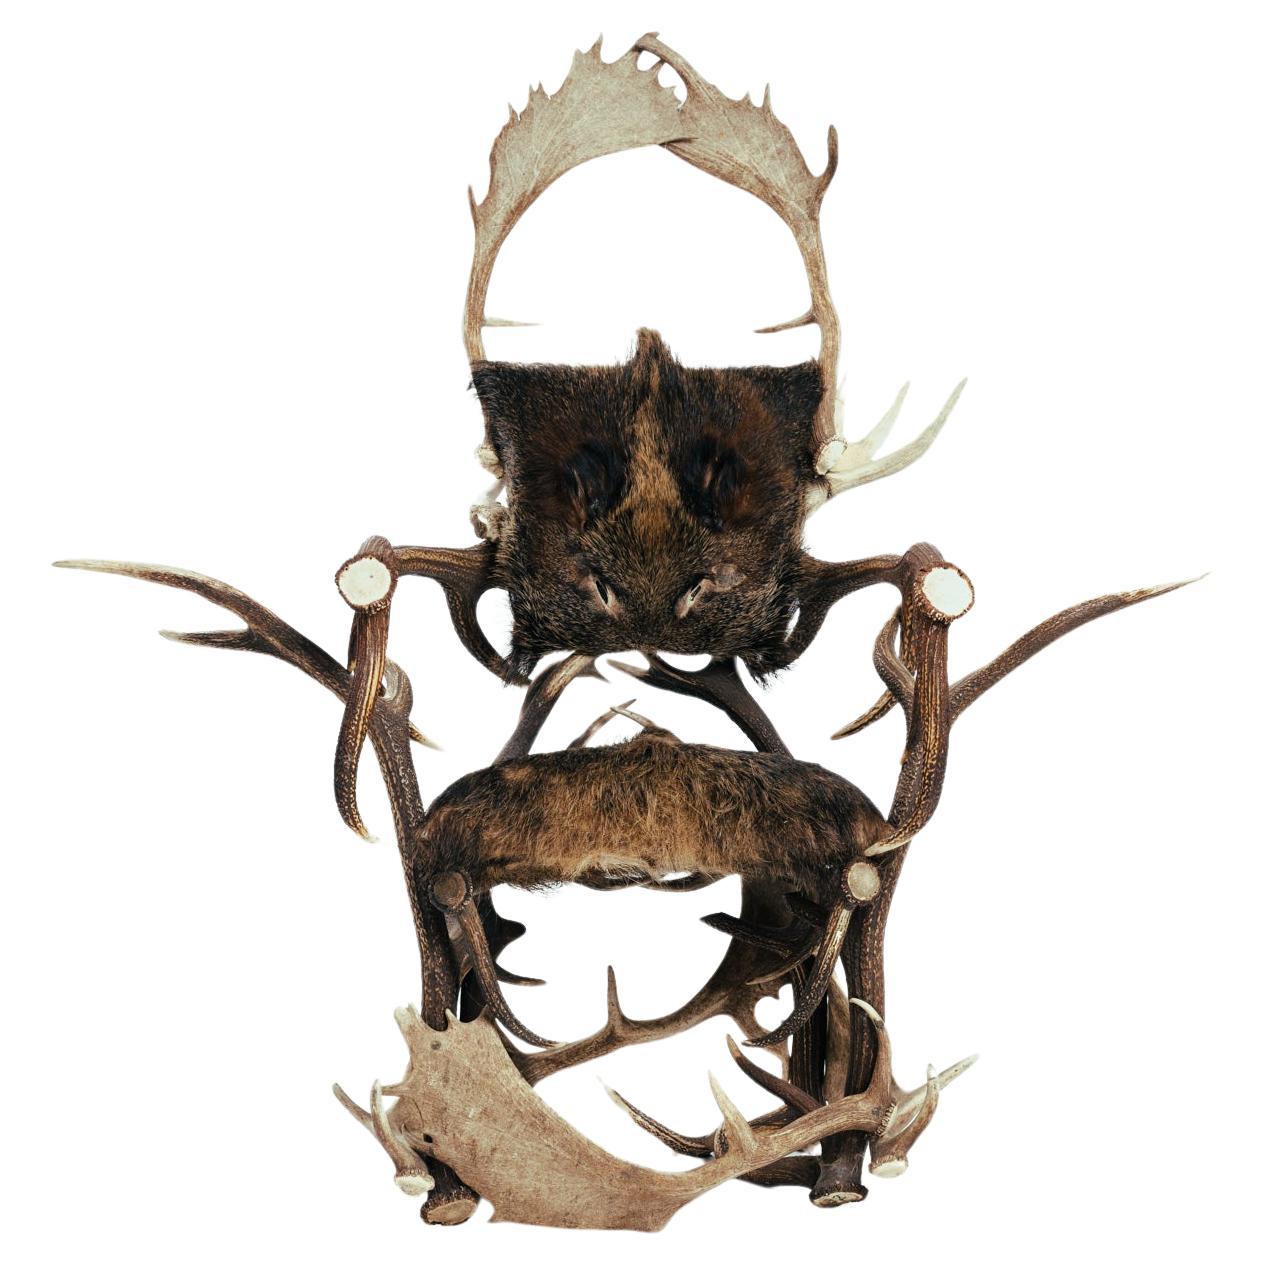 Hunting trophy armchair of antlers, wild boar and red deer. Very expressive and impressive looking throne 
The fluid form of the antlers creates a sculptural, organic aesthetic. 
Next to that this chair is usable and comfortable. It has taken great